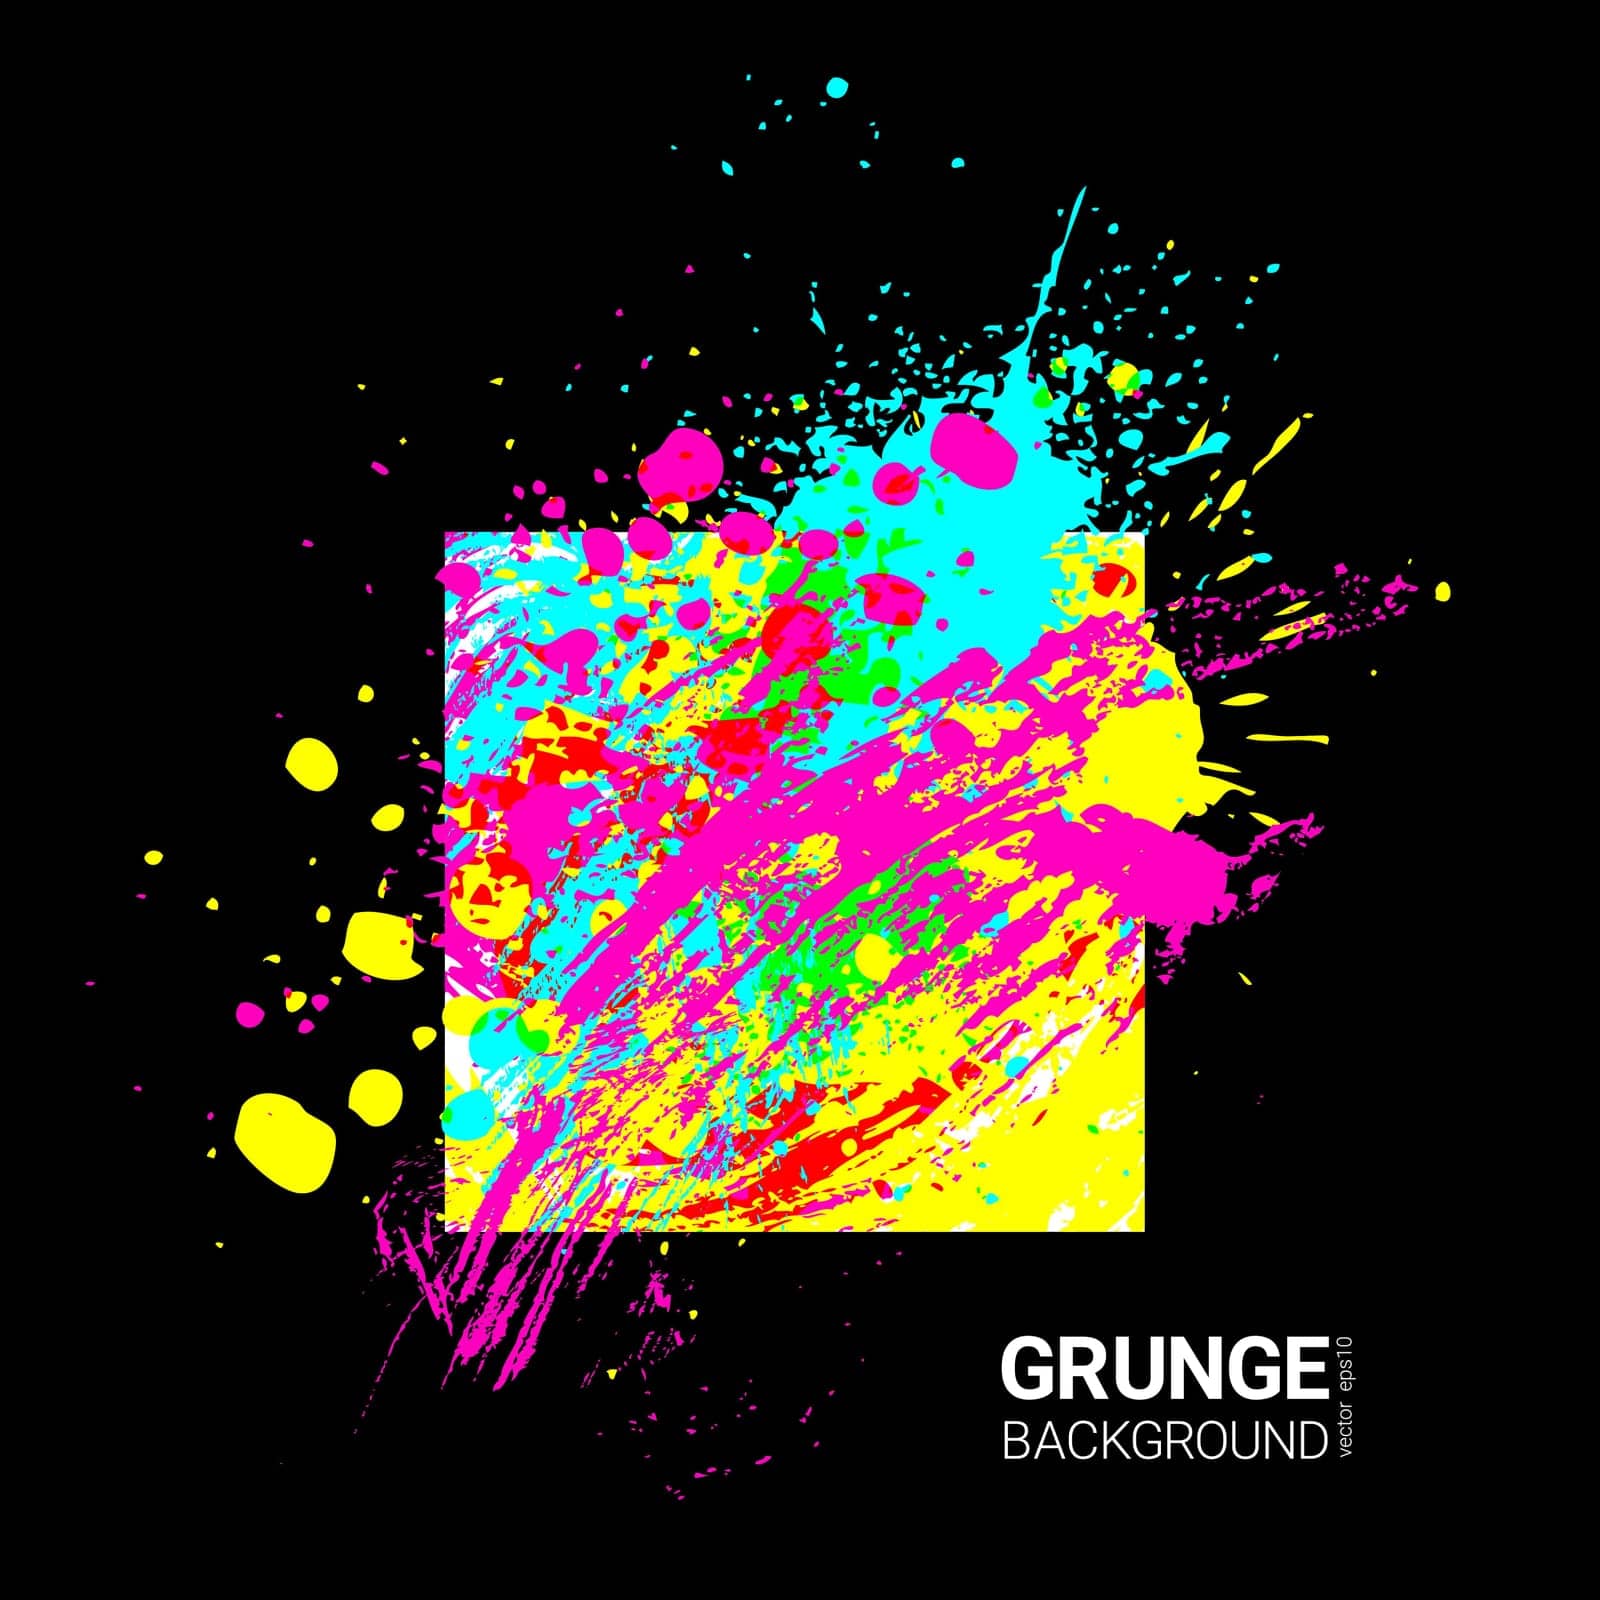 Abstract art paint ink splash, colorful blobs, drops and brush strokes on black background. Vector grunge illustration, design template for creative.